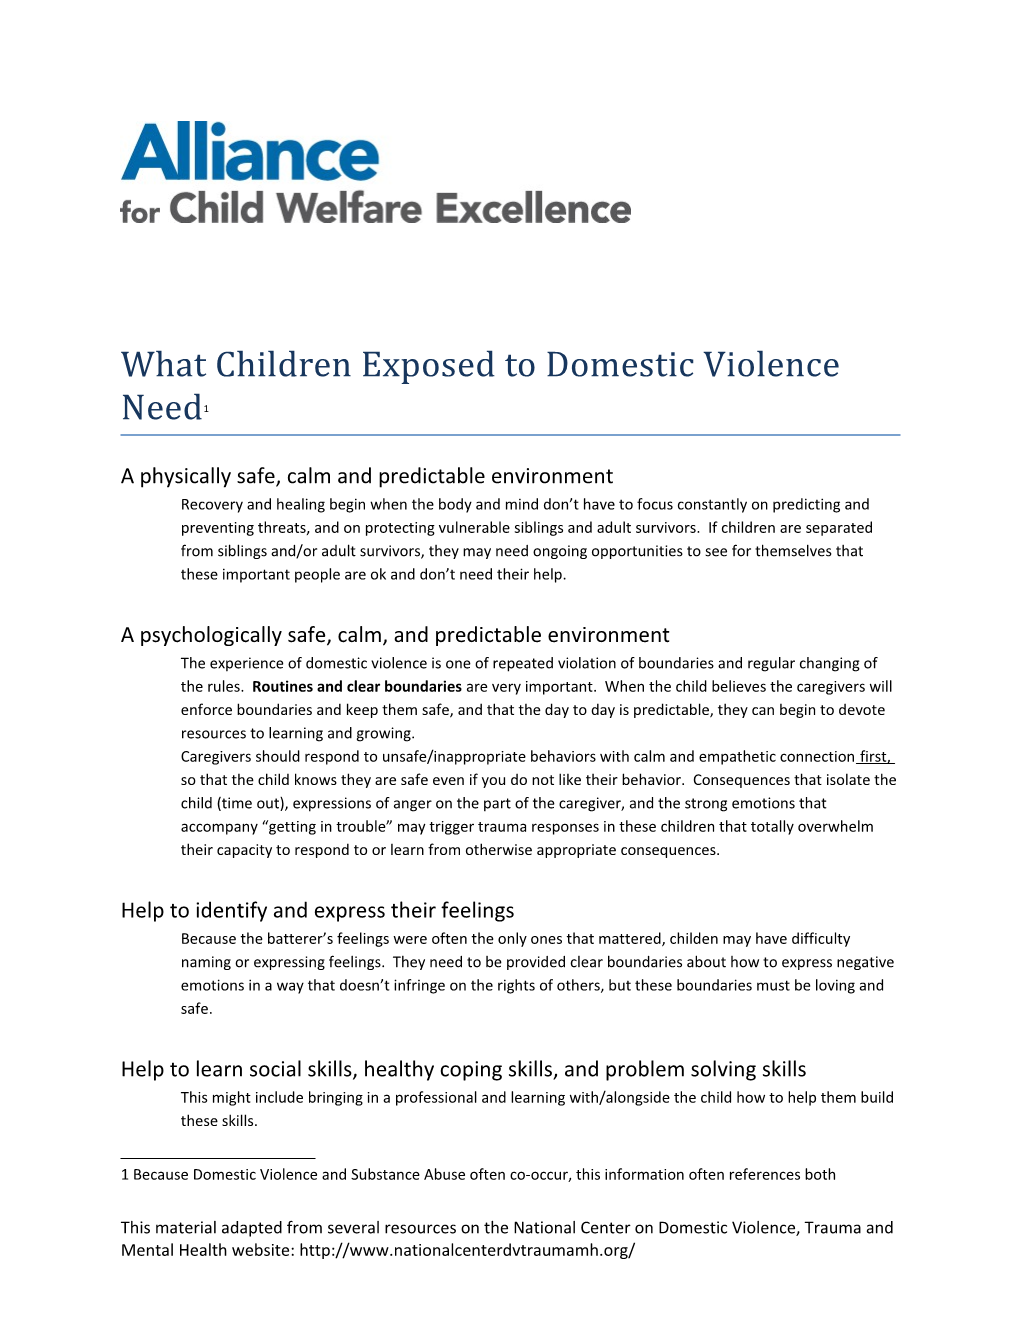 What Children Exposed to Domestic Violence Need 1